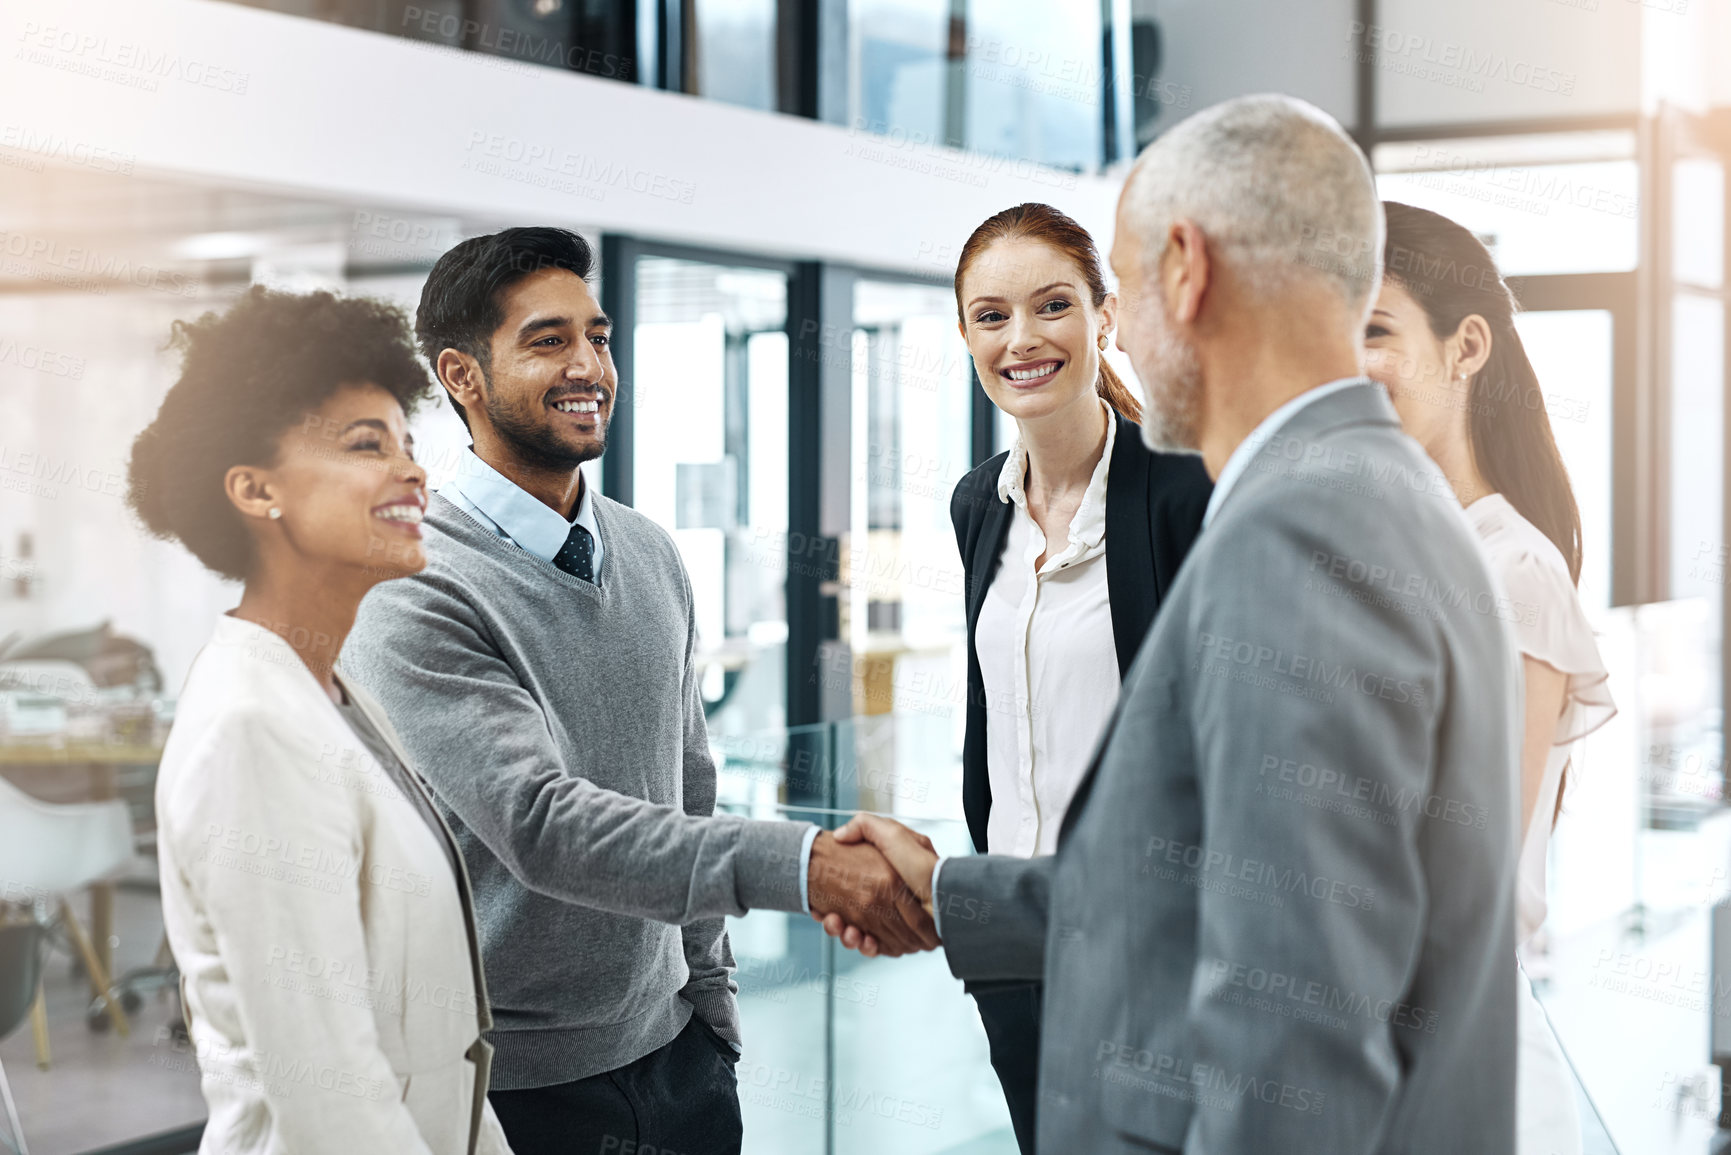 Buy stock photo Shot of two businessmen shaking hands while their colleagues look on